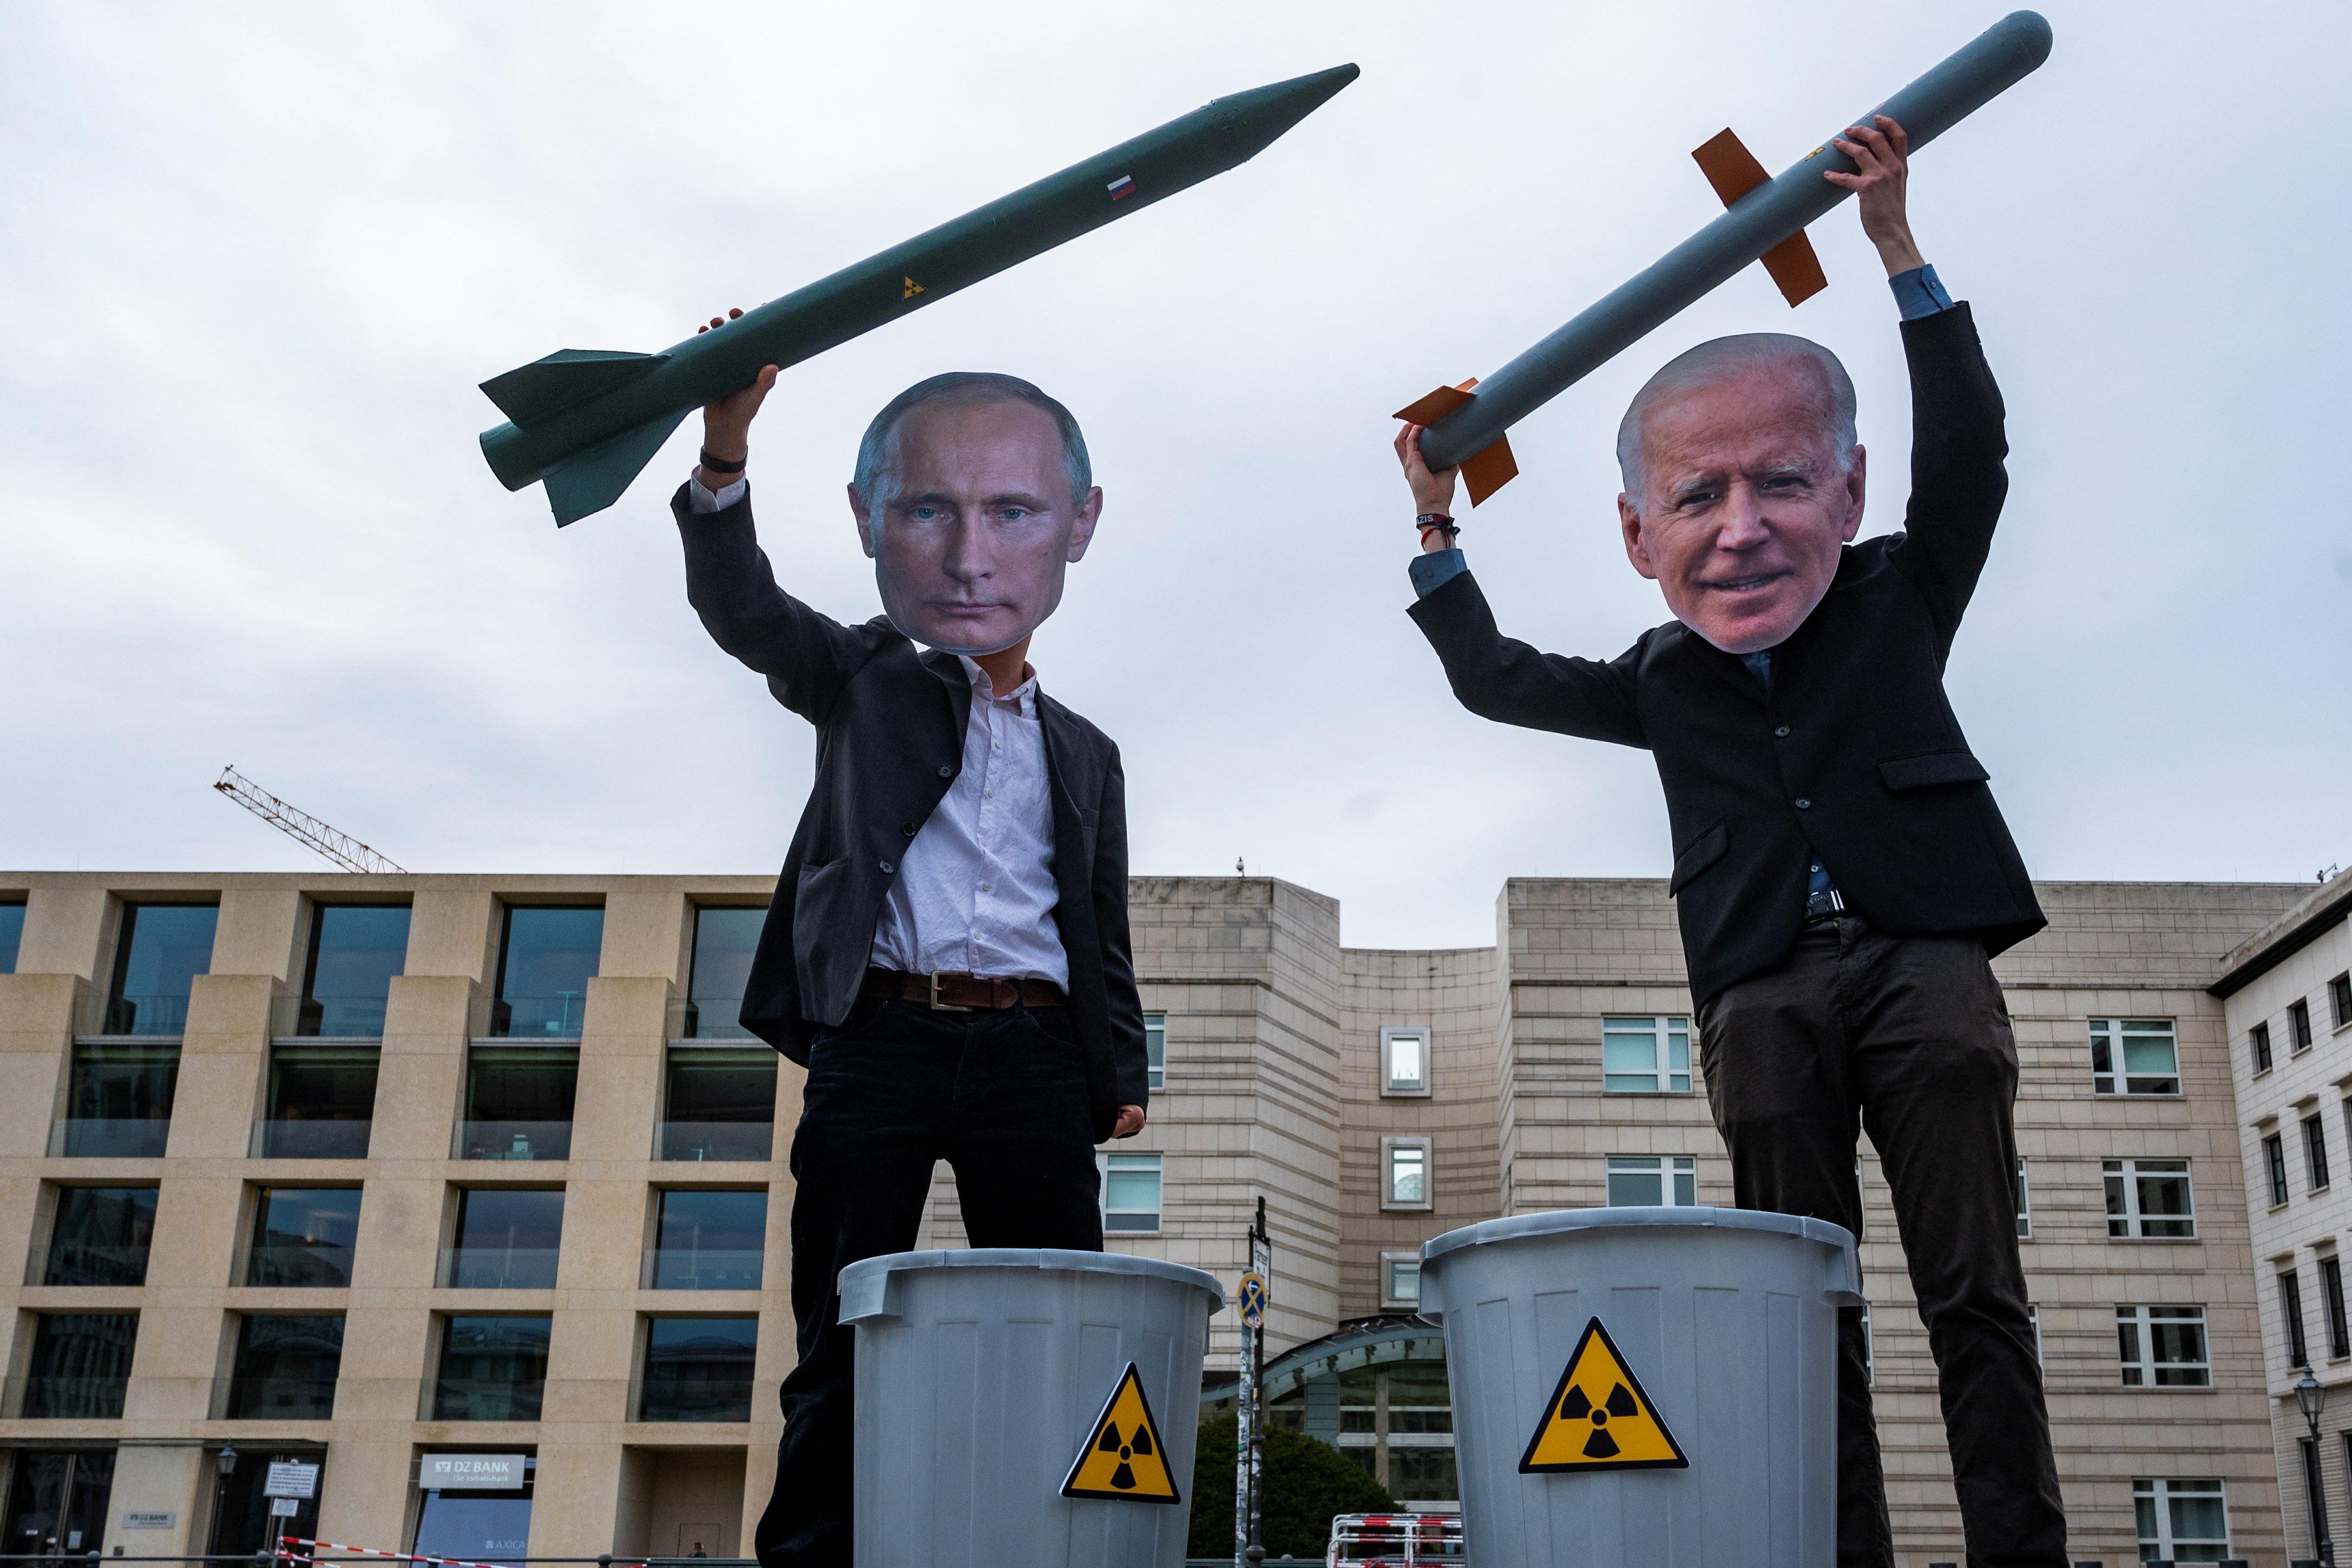 Peace activists wearing masks of Russian President Vladimir Putin (L) and newly elected US President Joe Biden pose with mock nuclear missiles in front of the US embassy in Berlin on January 29, 2021 in an action to call for more progress in nuclear disarmament. - The Russian parliament on January 27, 2021 unanimously voted to ratify an agreement to extend by five years a key nuclear pact with the United States that was set to expire soon. Signed in 2010, the New START contract caps to 1,550 the number of nuclear warheads that can be deployed by Moscow and Washington, which control the world's largest nuclear arsenals. The agreement, which was due to expire on February 5, is seen as a rare opportunity for compromise between Moscow and Washington, whose ties have dramatically deteriorated in recent years. (Photo by John MACDOUGALL / AFP) (Photo by JOHN MACDOUGALL/AFP via Getty Images)